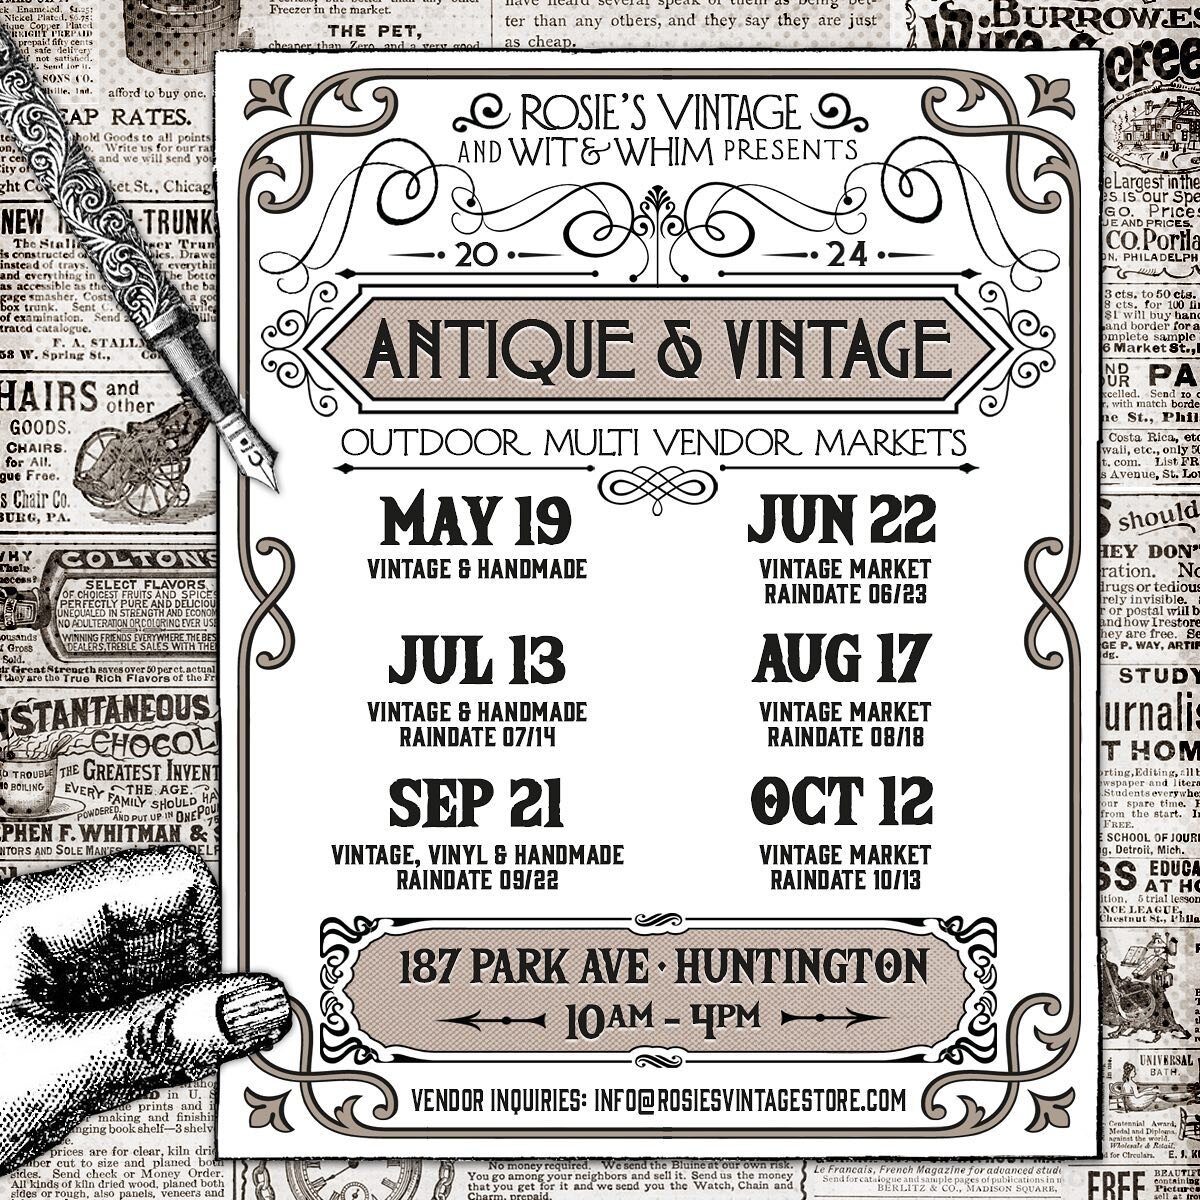 ✨Rosie&rsquo;s Vintage &amp; Wit &amp; Whim&rsquo;s Antique &amp; Vintage Market✨

We heard all your requests, all winter long, and so we are very excited to unveil another year of Sensory Overload Shopping Events!  First up&hellip; A mix of both Han